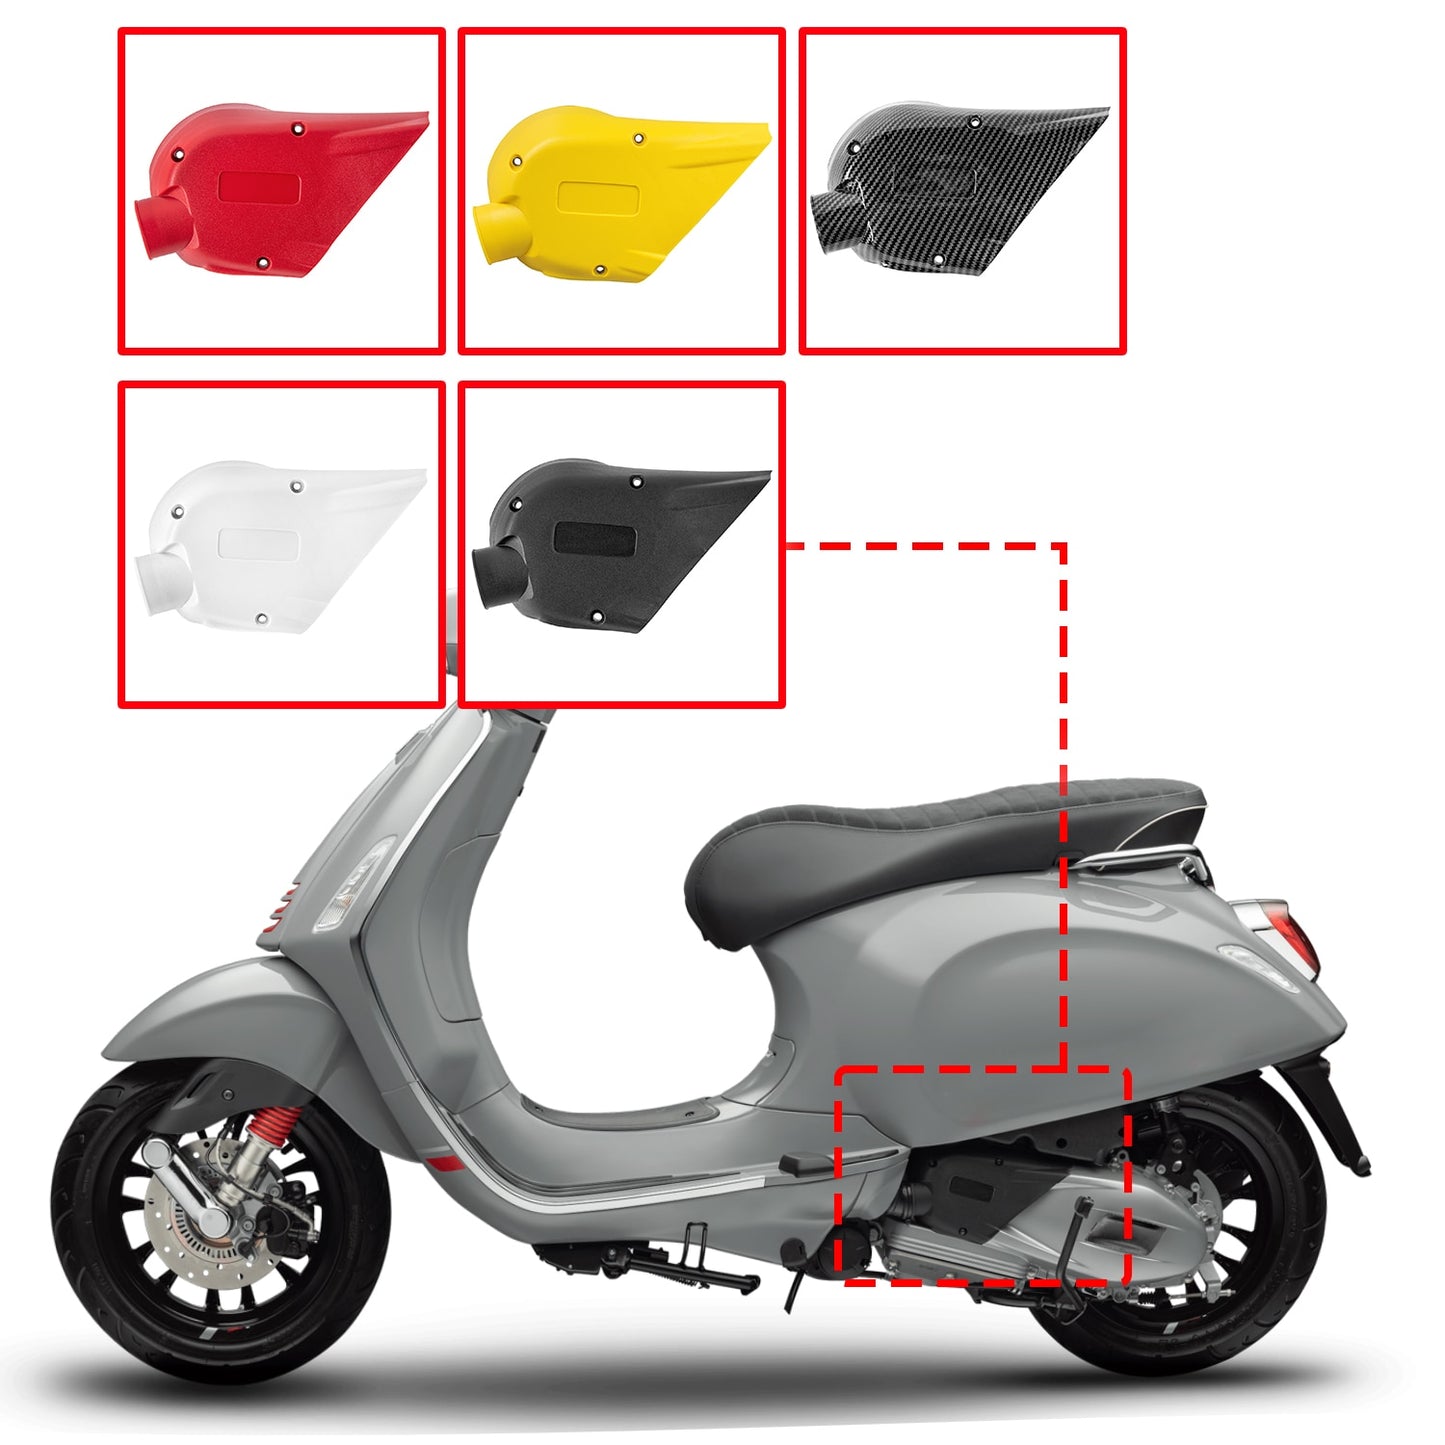 Wolfline Motorcycle Engine Cover Transmission Case Compound Box Guard For Vespa Sprint Primavera 50/125/150 2014-2021 Gearbox Shell Parts